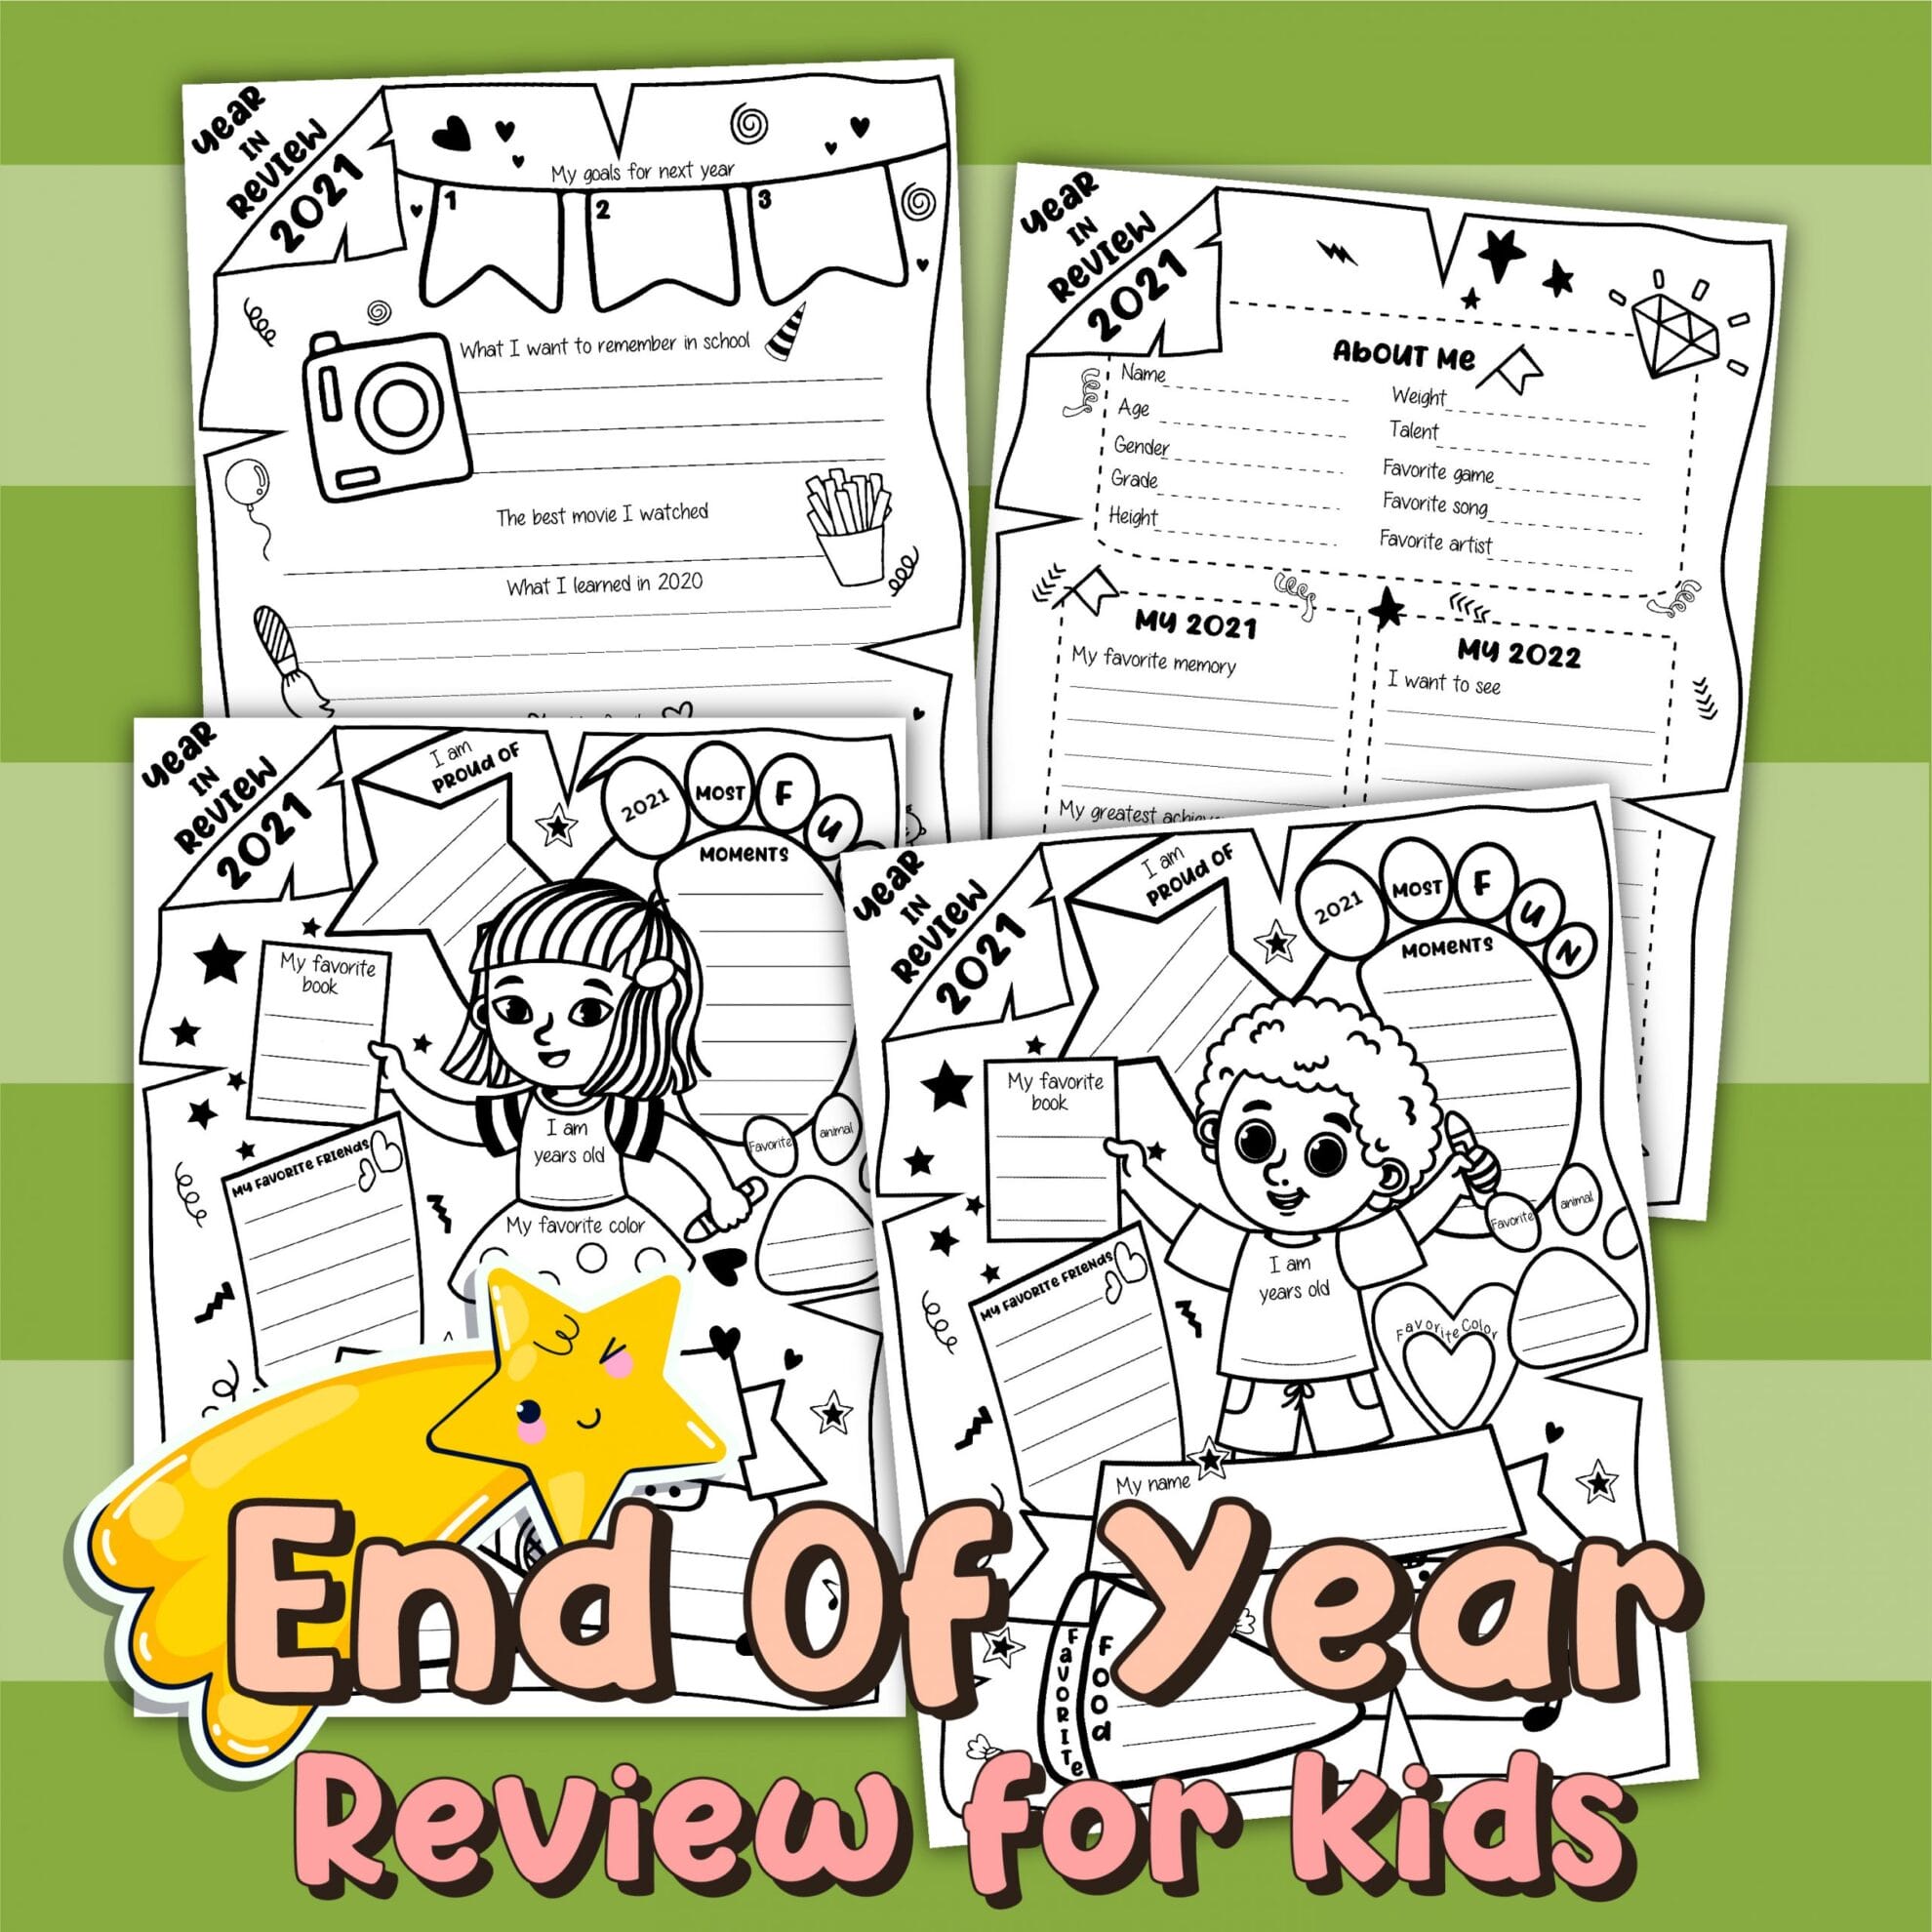 These Kids Year in Review Activity Sheets are the perfect way to end the year. This printable packet includes a variety of fun and engaging questions that will help your child reflect on their year and prepare for the next one. A terrific New Year's Eve activity for children and great for classroom use.